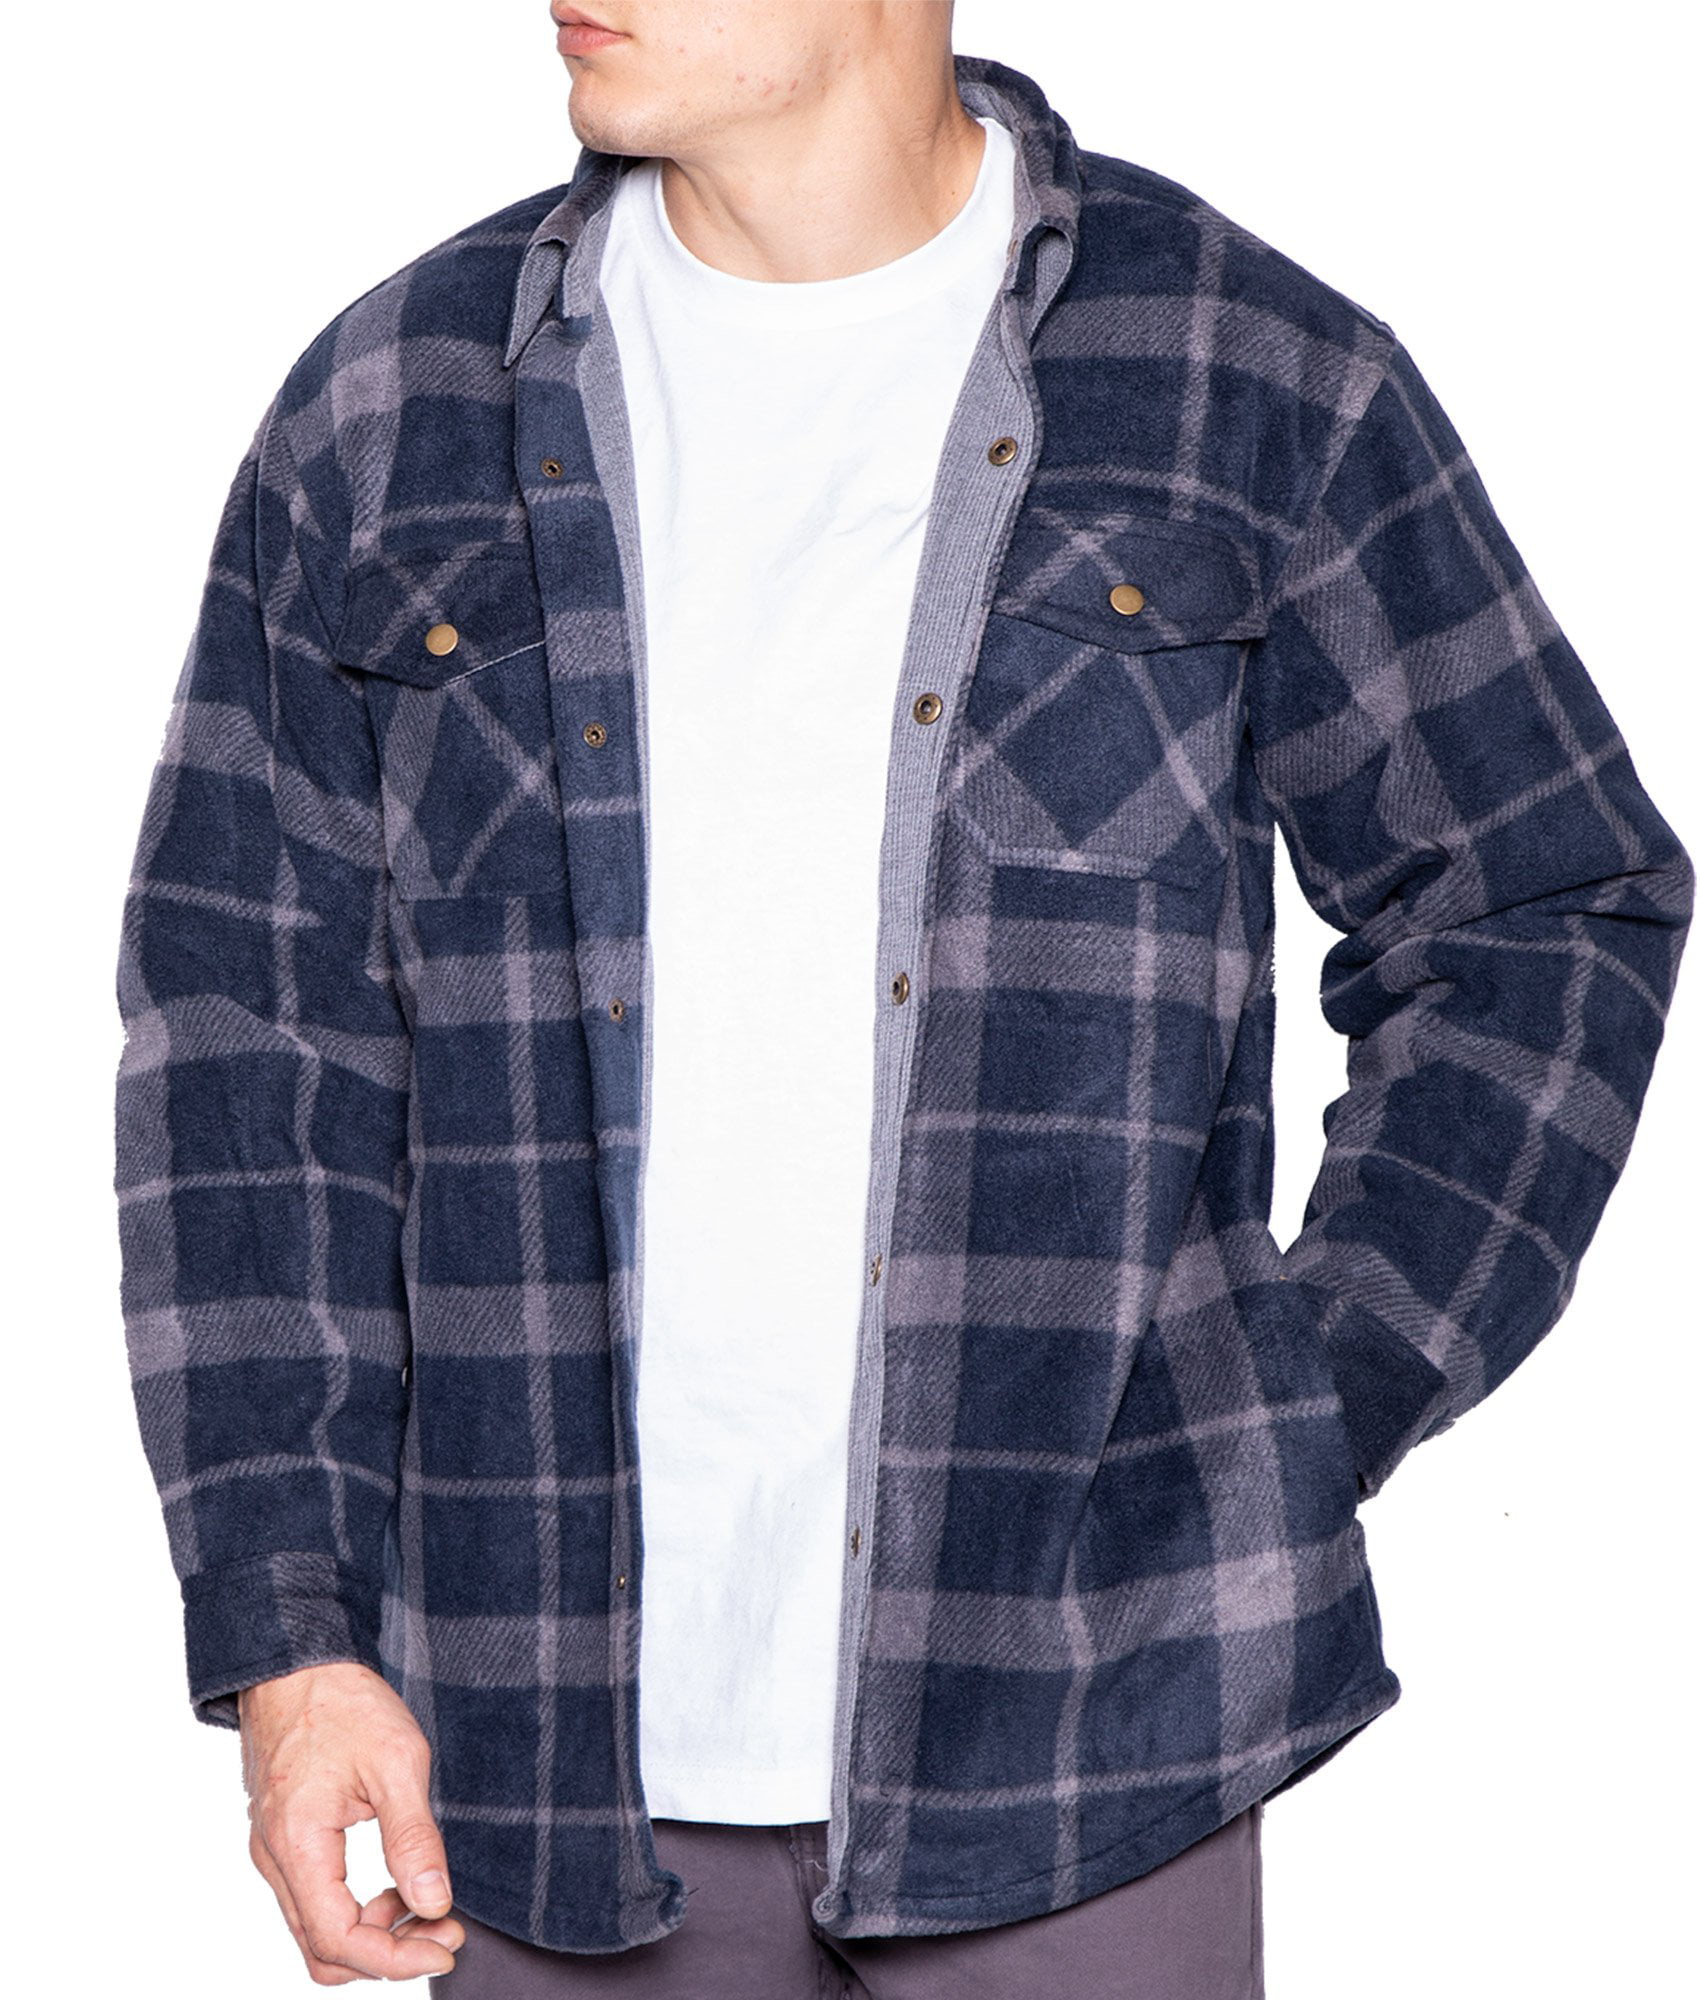 Flannel Shirt Jackets for Men Big And Tall Heavy Quilted Thermal Lined